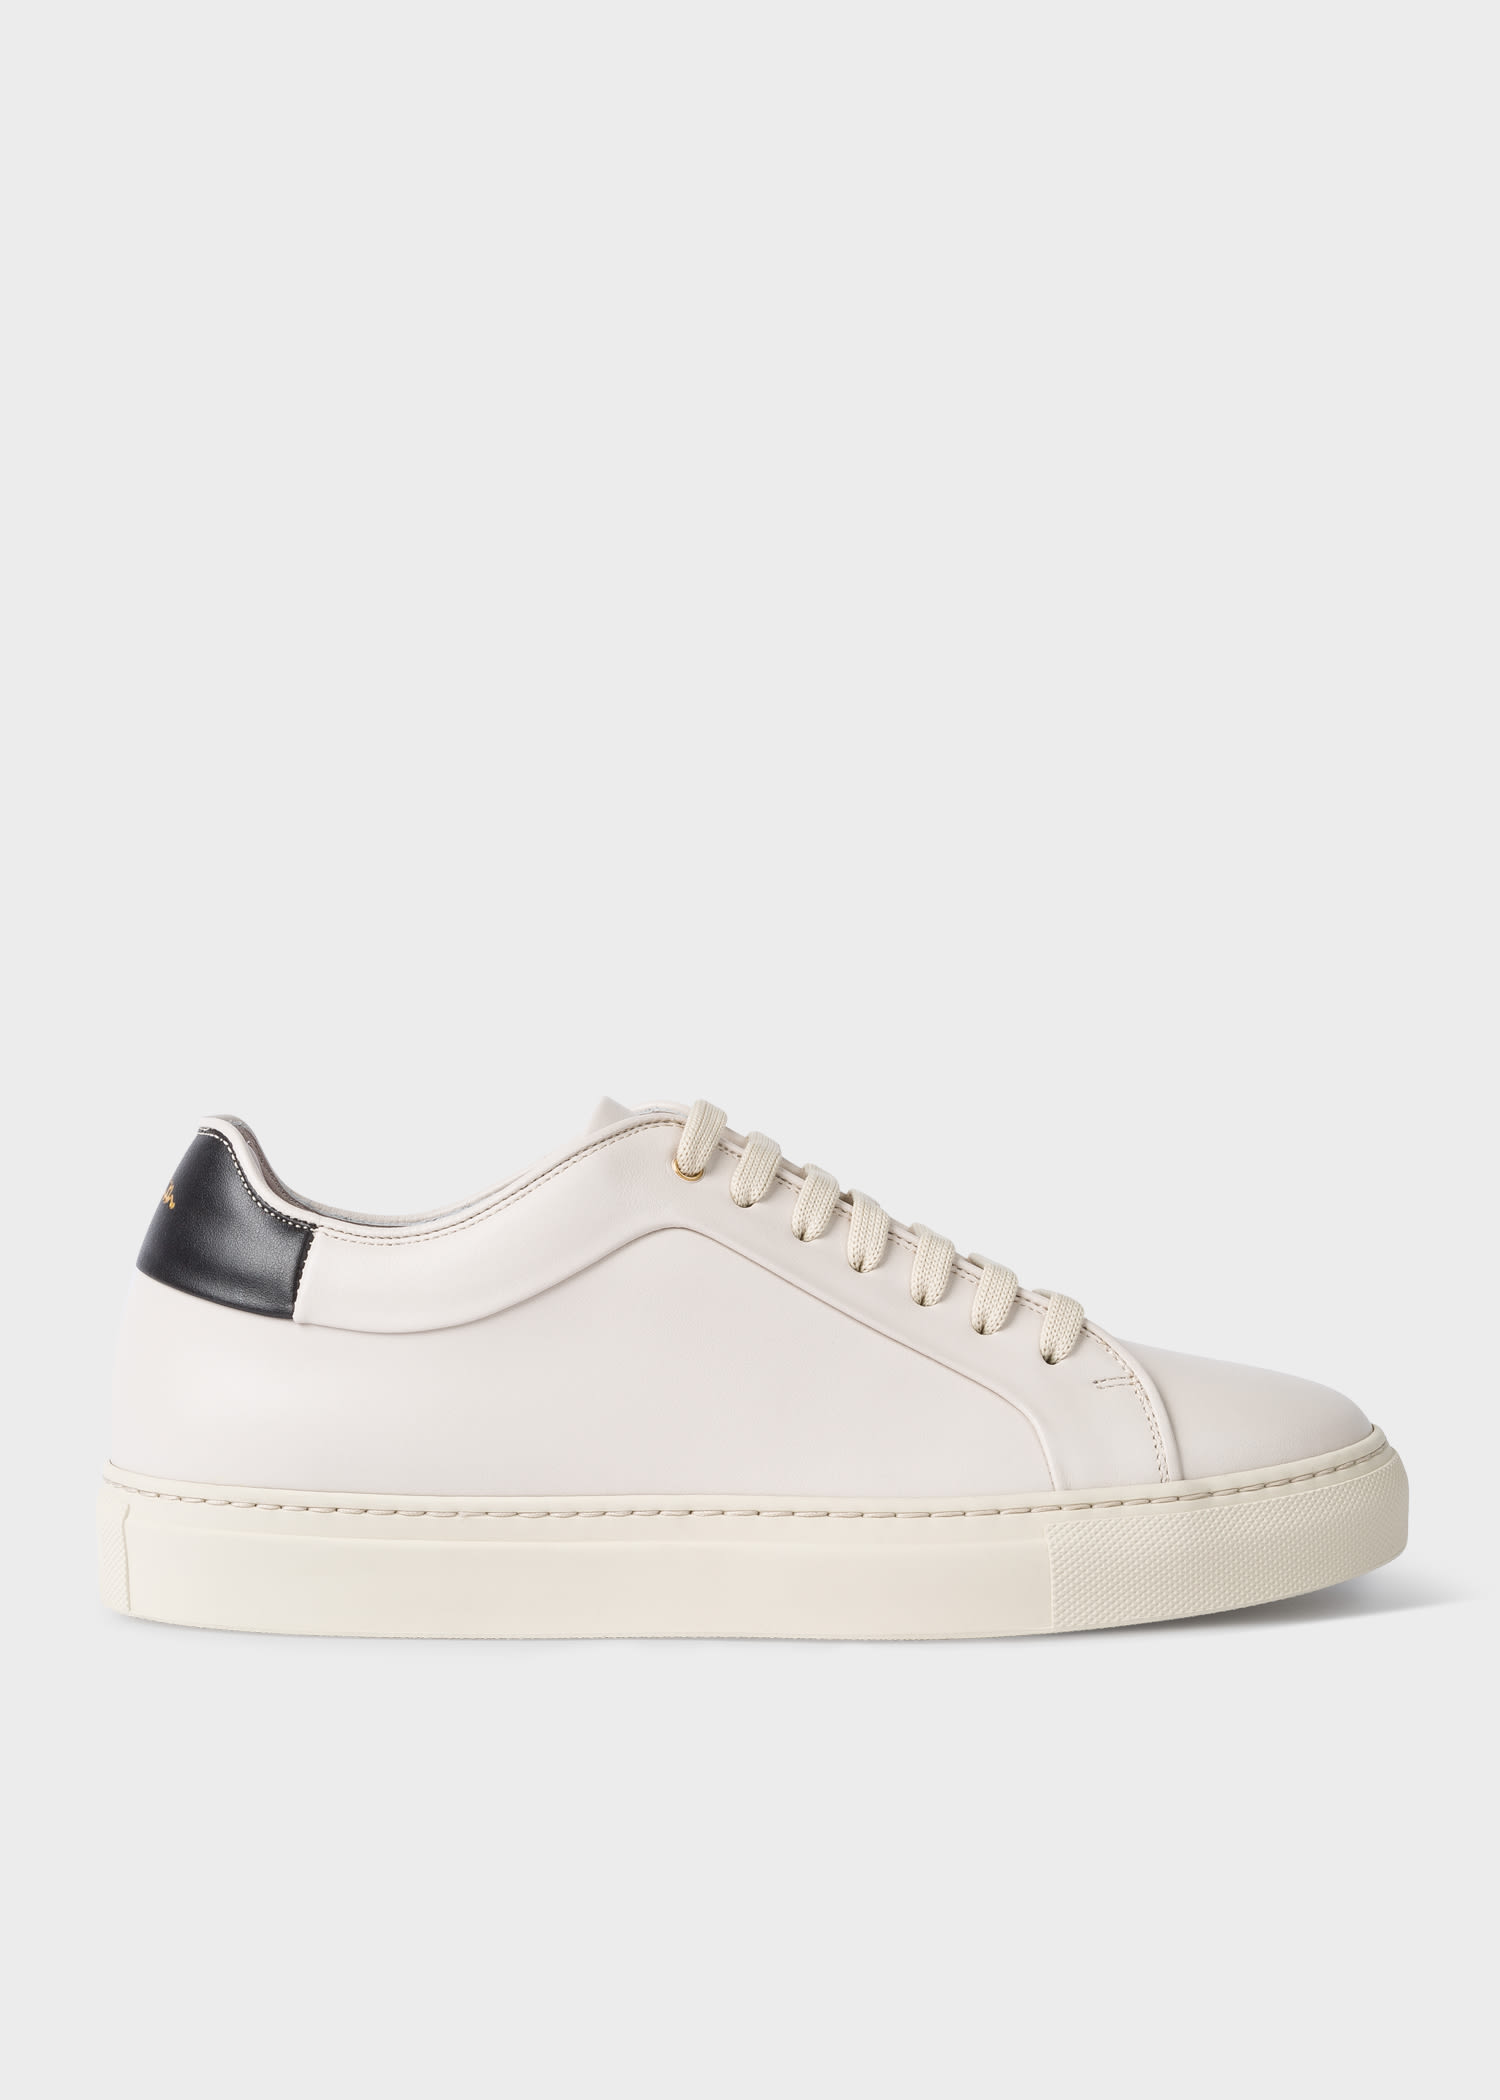 Men's White Leather 'Basso' Trainers With 'Signature Stripe' Panel ...